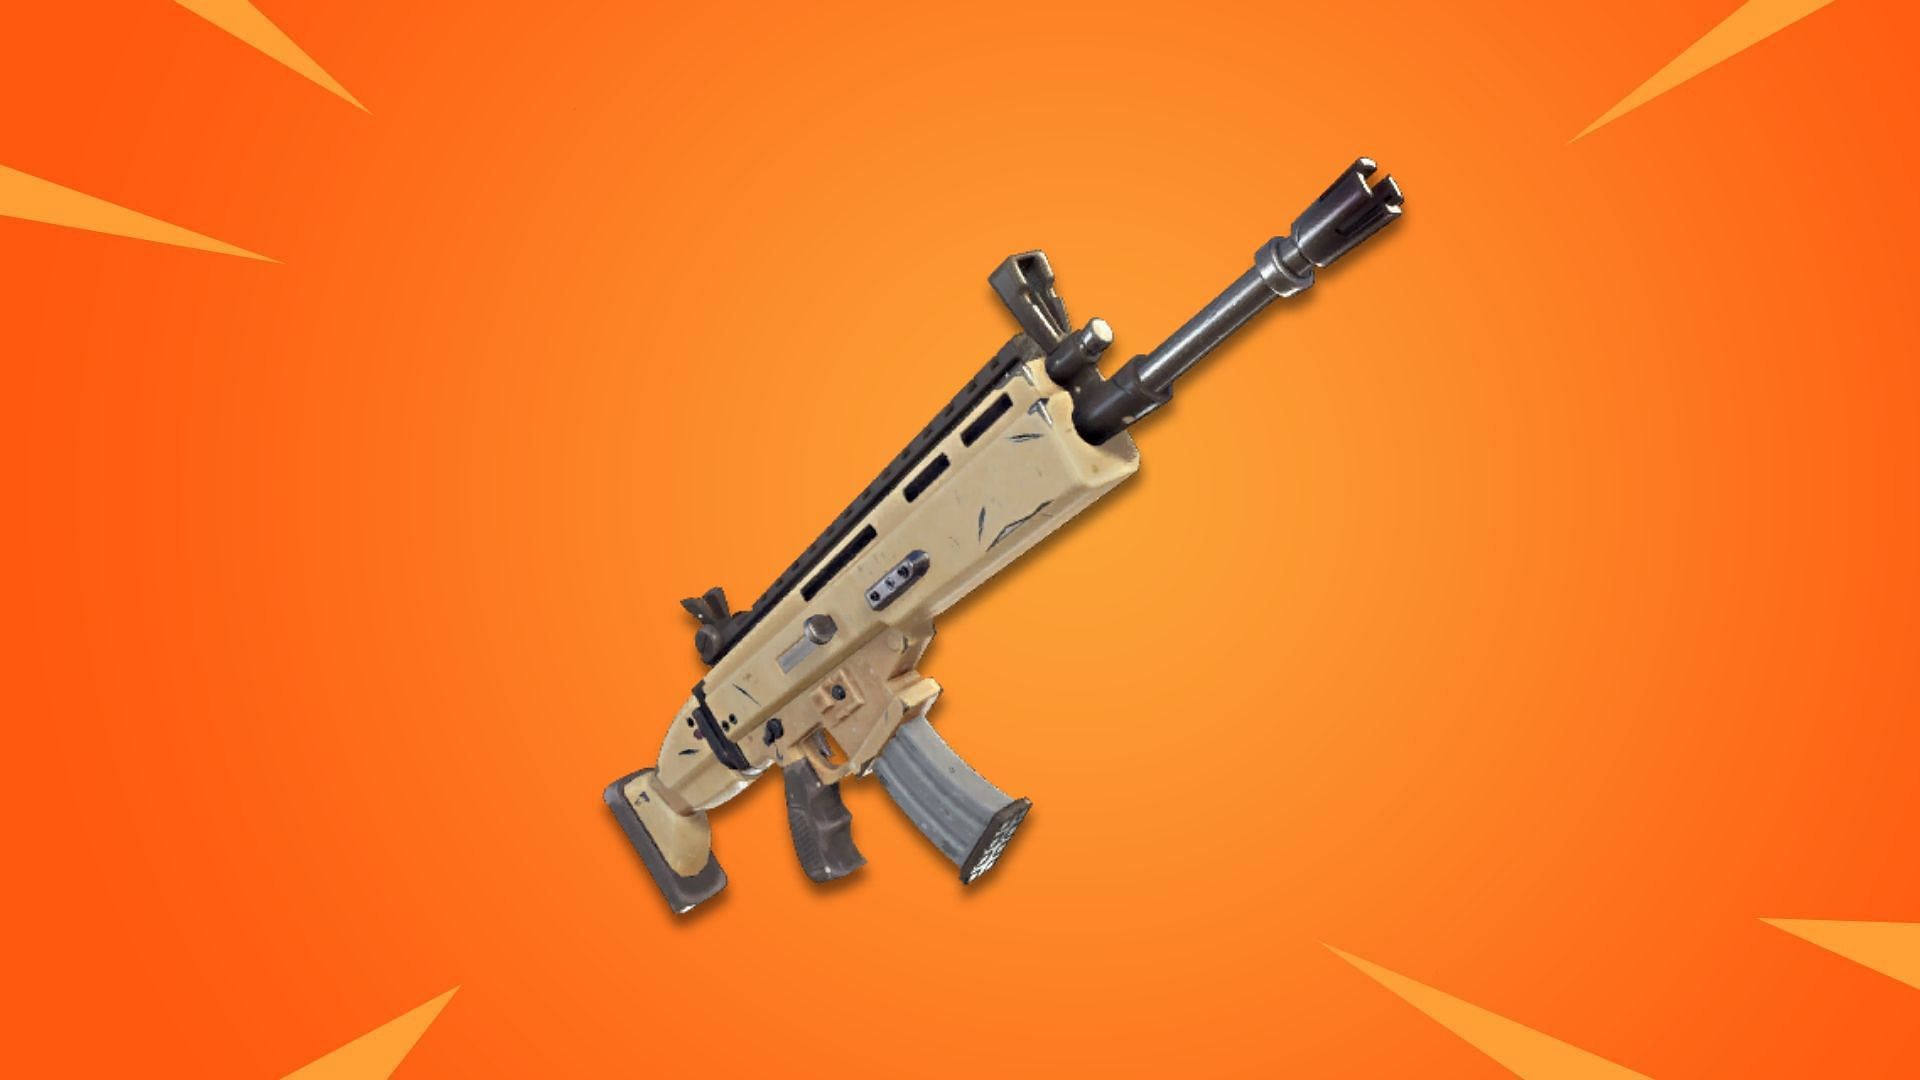 The Assault Rifle in Fortnite. (Image via Epic Games)